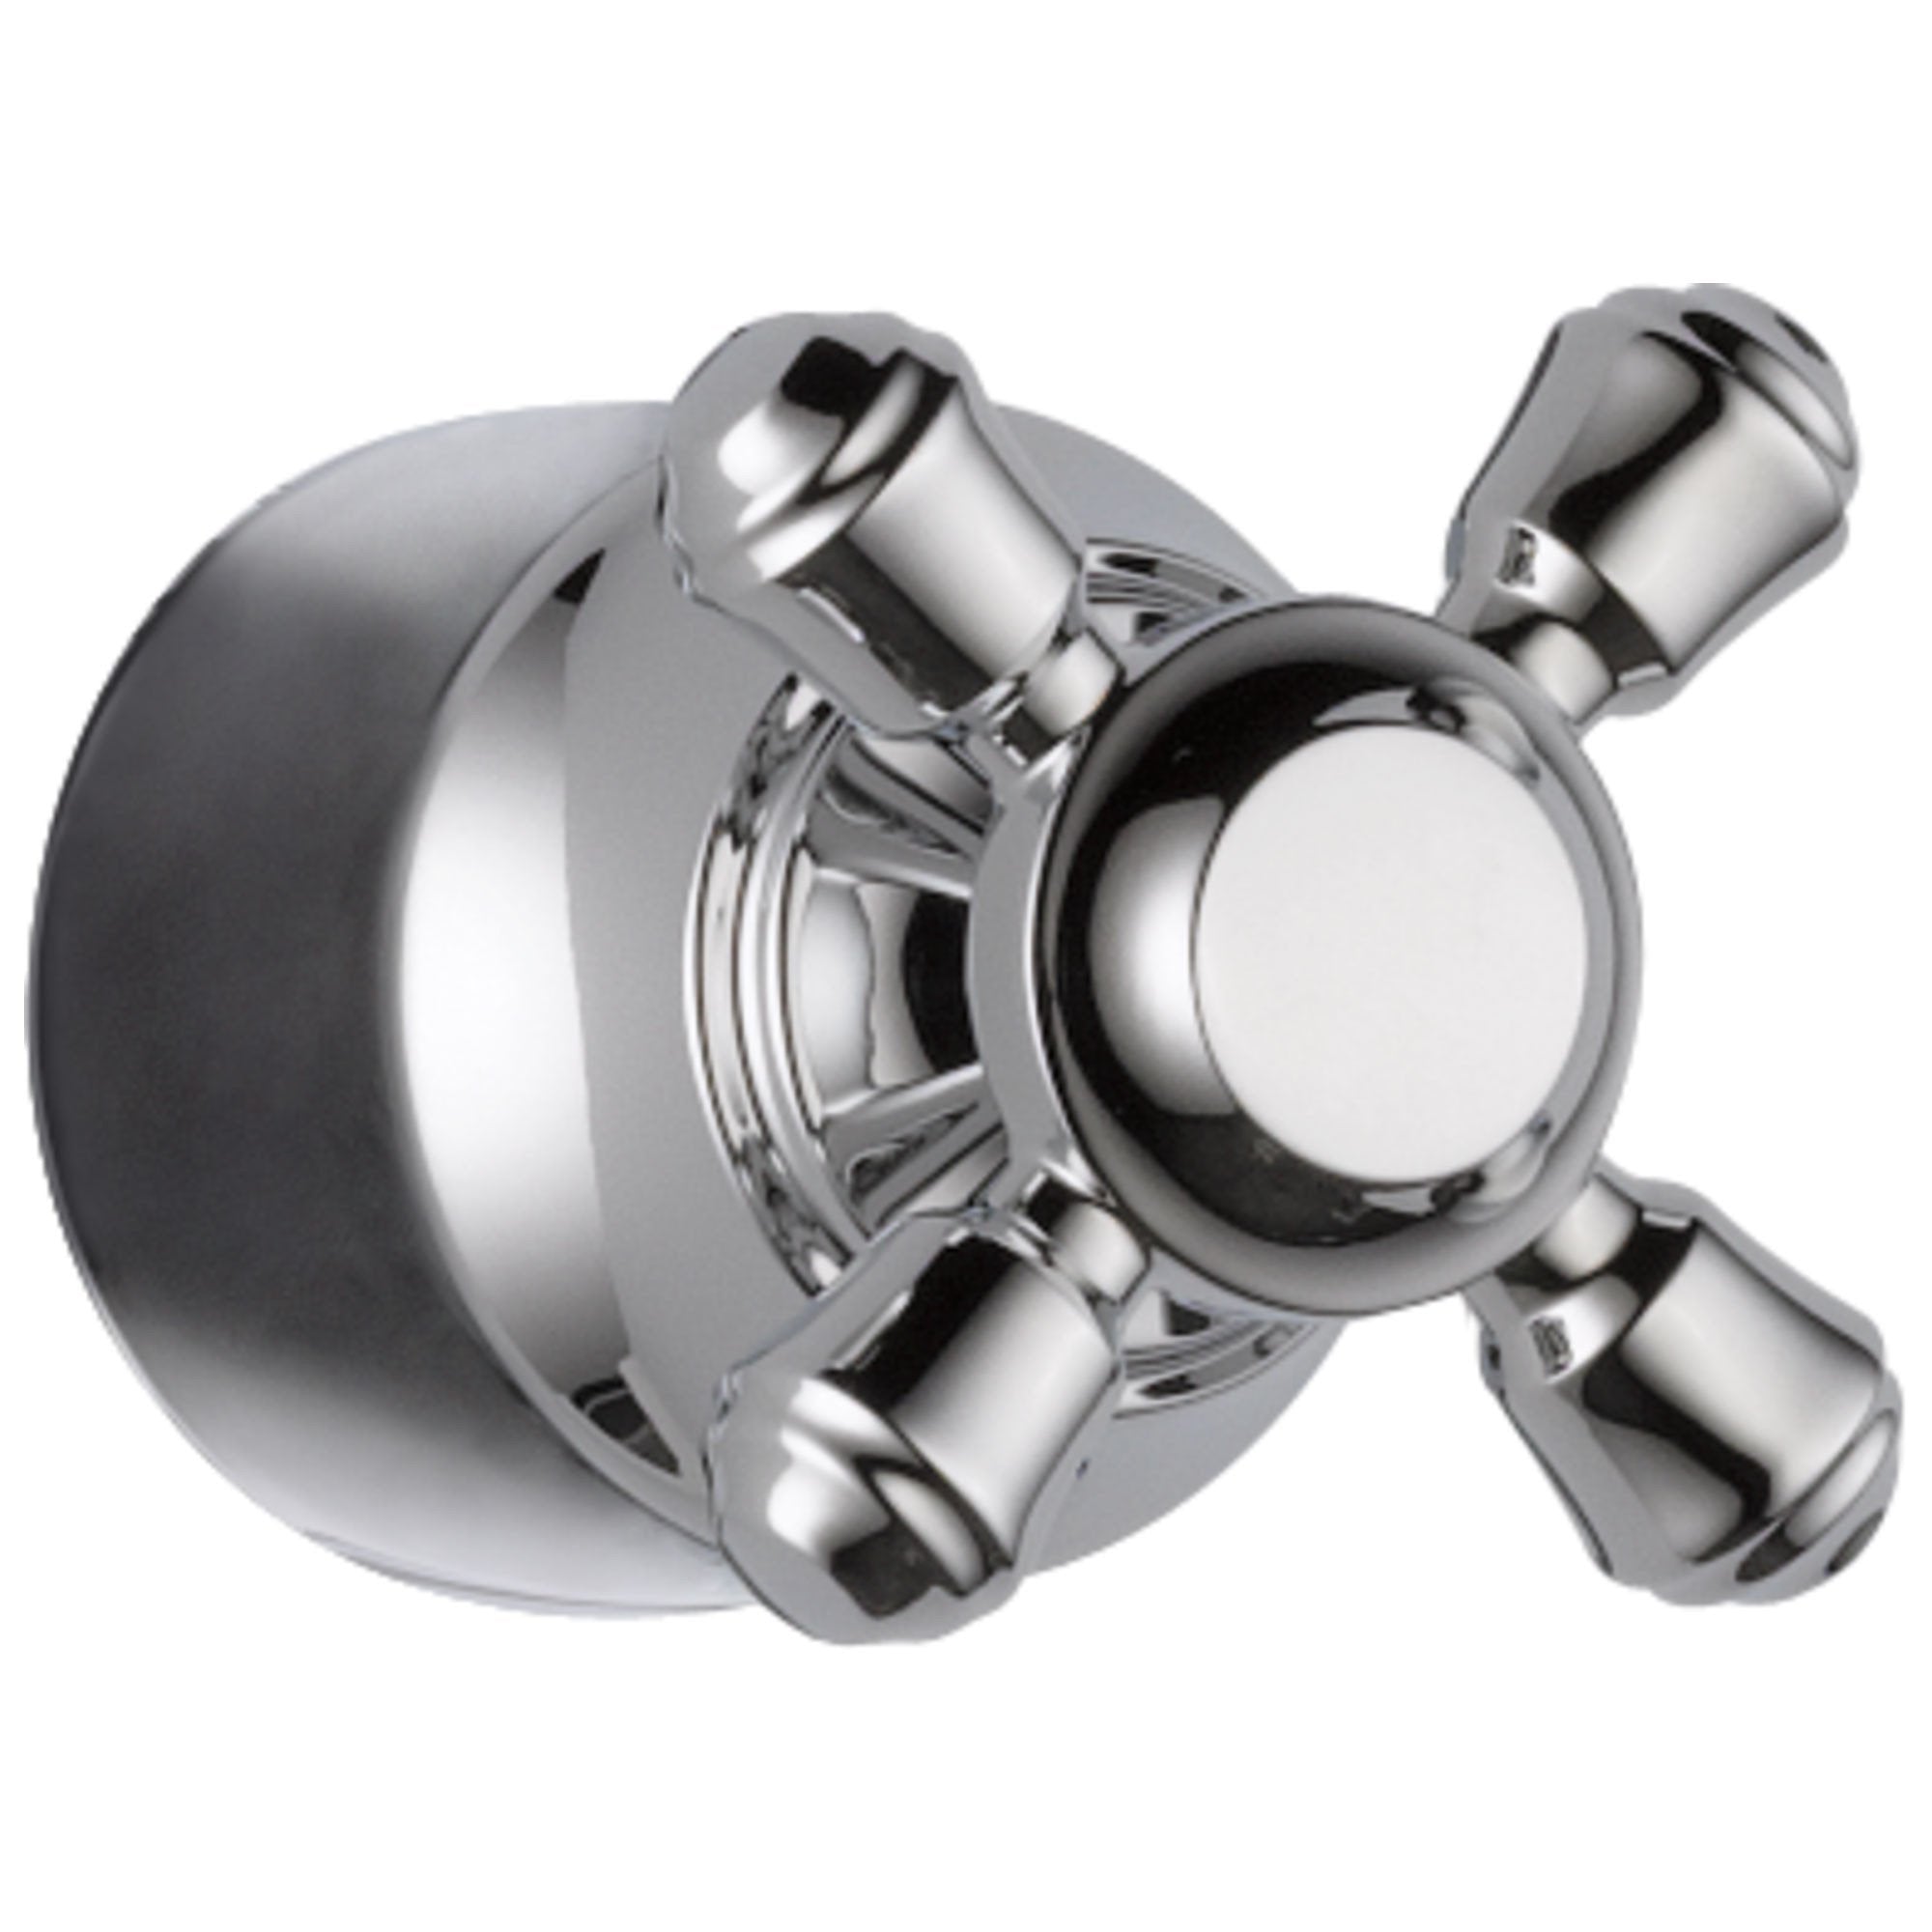 Delta Cassidy Collection Chrome Finish Diverter / Transfer Valve Cross Handle - Quantity 1 Included 579622